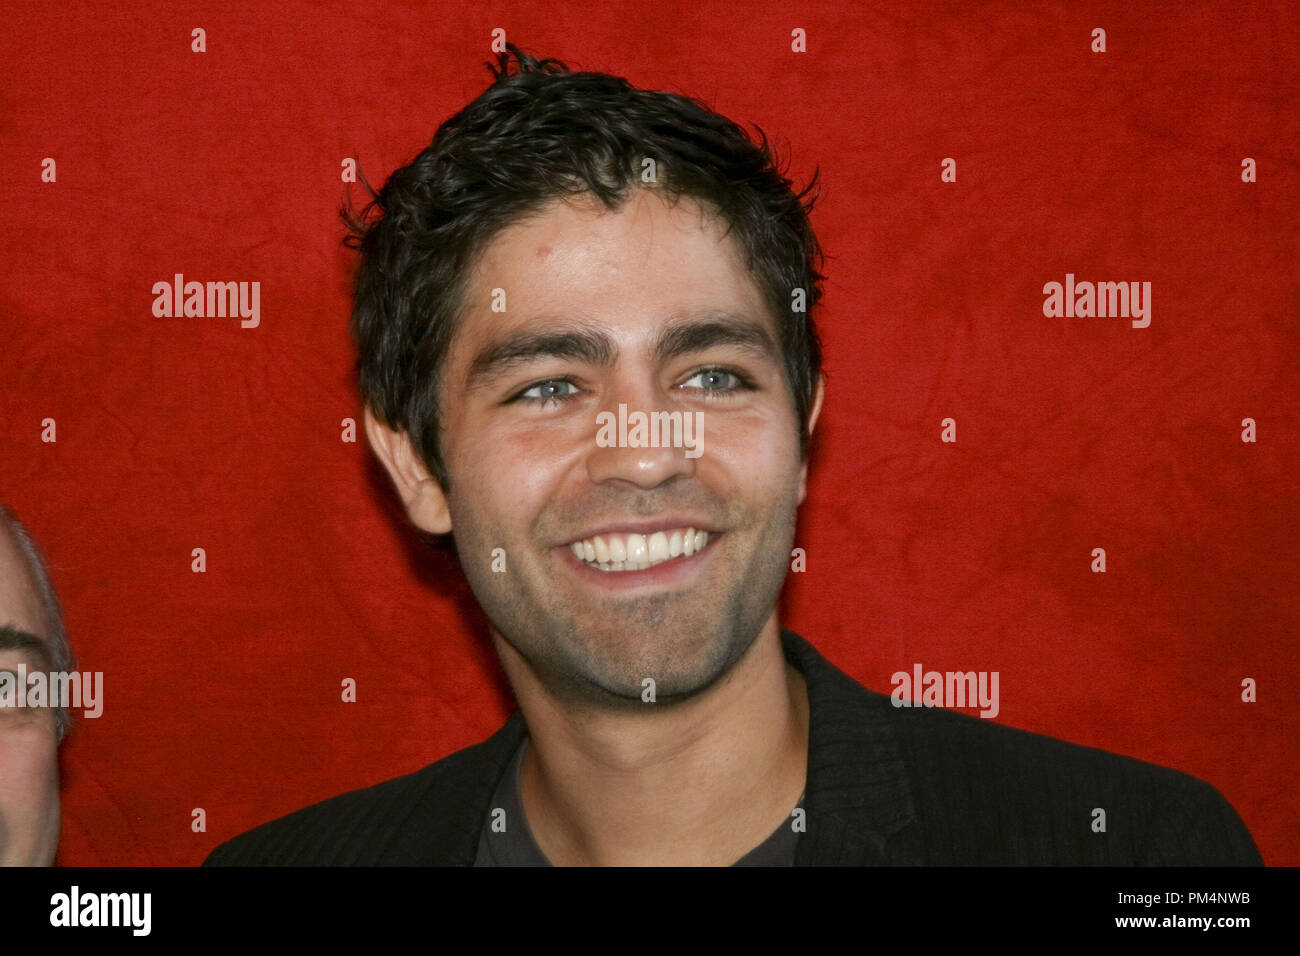 Adrian Grenier 'Teenage Paparazzo' Portrait Session, August 16, 2010.  Reproduction by American tabloids is absolutely forbidden. File Reference # 30445 015JRC  For Editorial Use Only -  All Rights Reserved Stock Photo